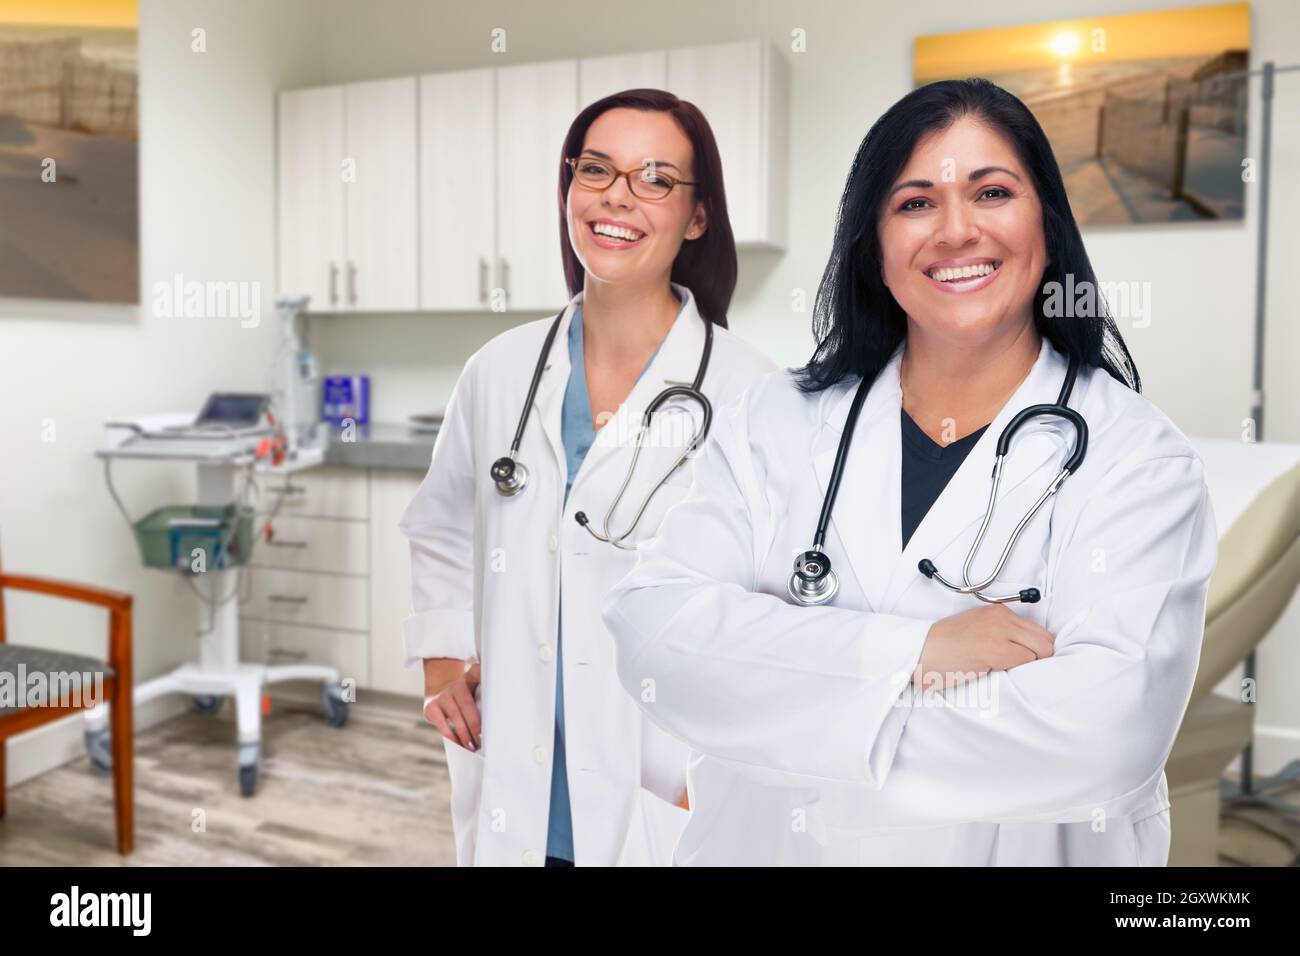 Hispanic and Caucasian Female Doctors Standing In Office. Stock Photo